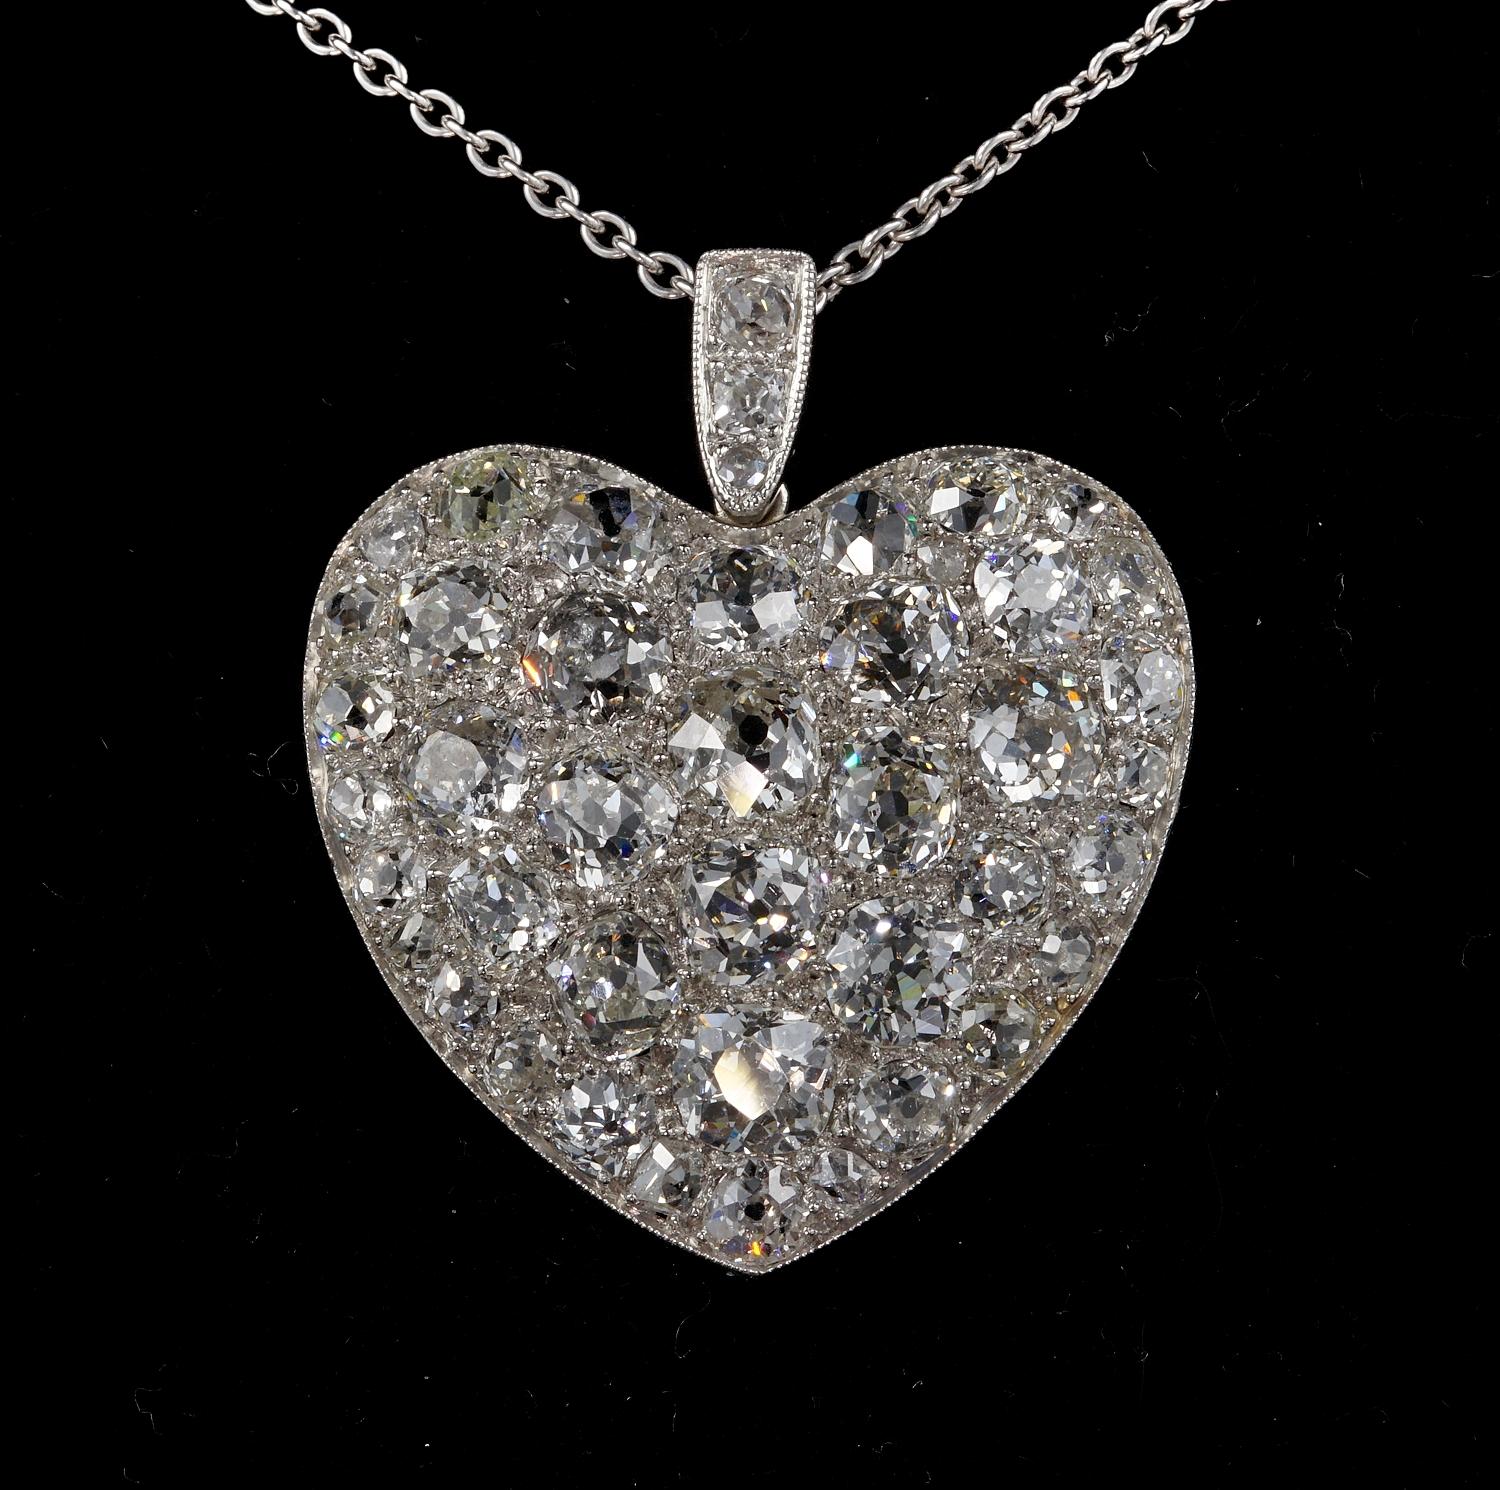 Spectacular Love Token
Stunning find from the Edwardian period
Authentic 1905 ca solid Platinum Crafted large Heart Pendant displaying a huge amount of old mine cut Diamonds all large and chunky in cut giving out a phenomenal amount of sparkle being